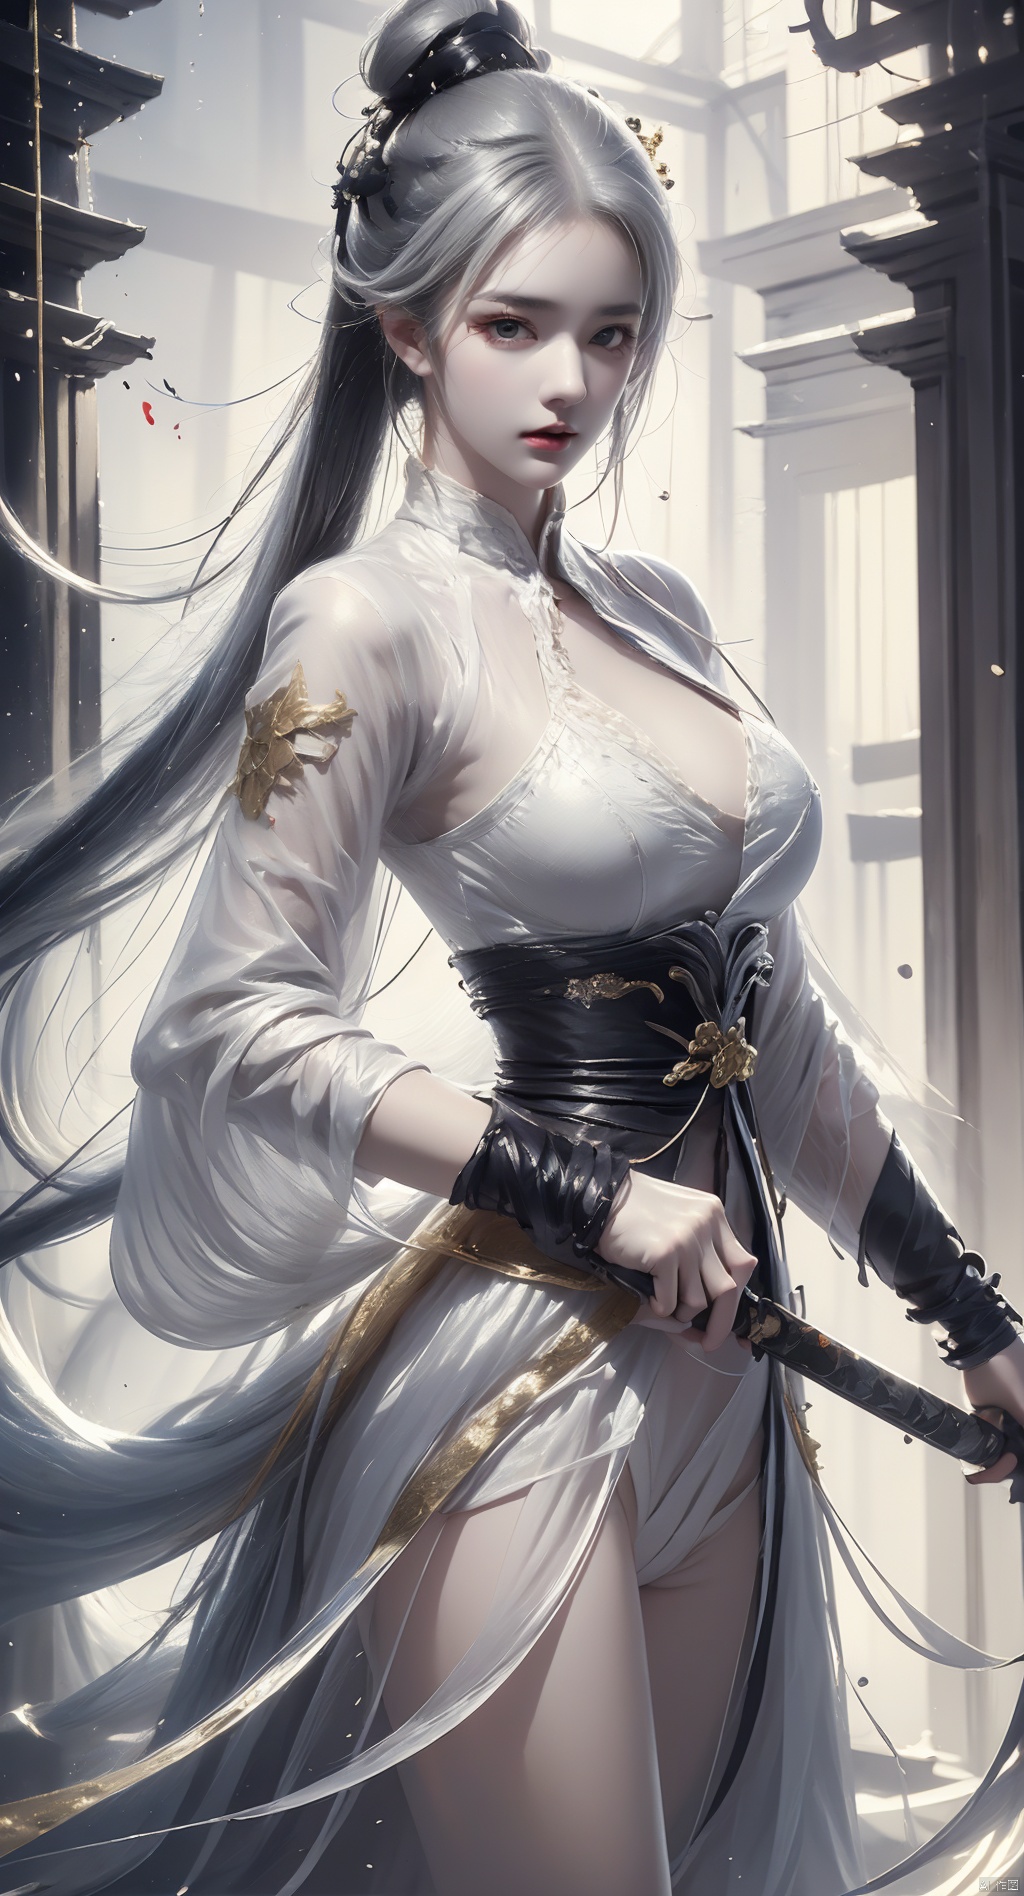  a woman with white hair holding a glowing ball in her hands, white haired deity, by Yang J, heise jinyao, inspired by Zhang Han, xianxia fantasy, flowing gold robes, inspired by Guan Daosheng, human and dragon fusion, cai xukun, inspired by Zhao Yuan, with long white hair, fantasy art style,,Ink scattering_Chinese style, smwuxia Chinese text blood weapon:sw, lotus leaf, (\shen ming shao nv\), gold armor